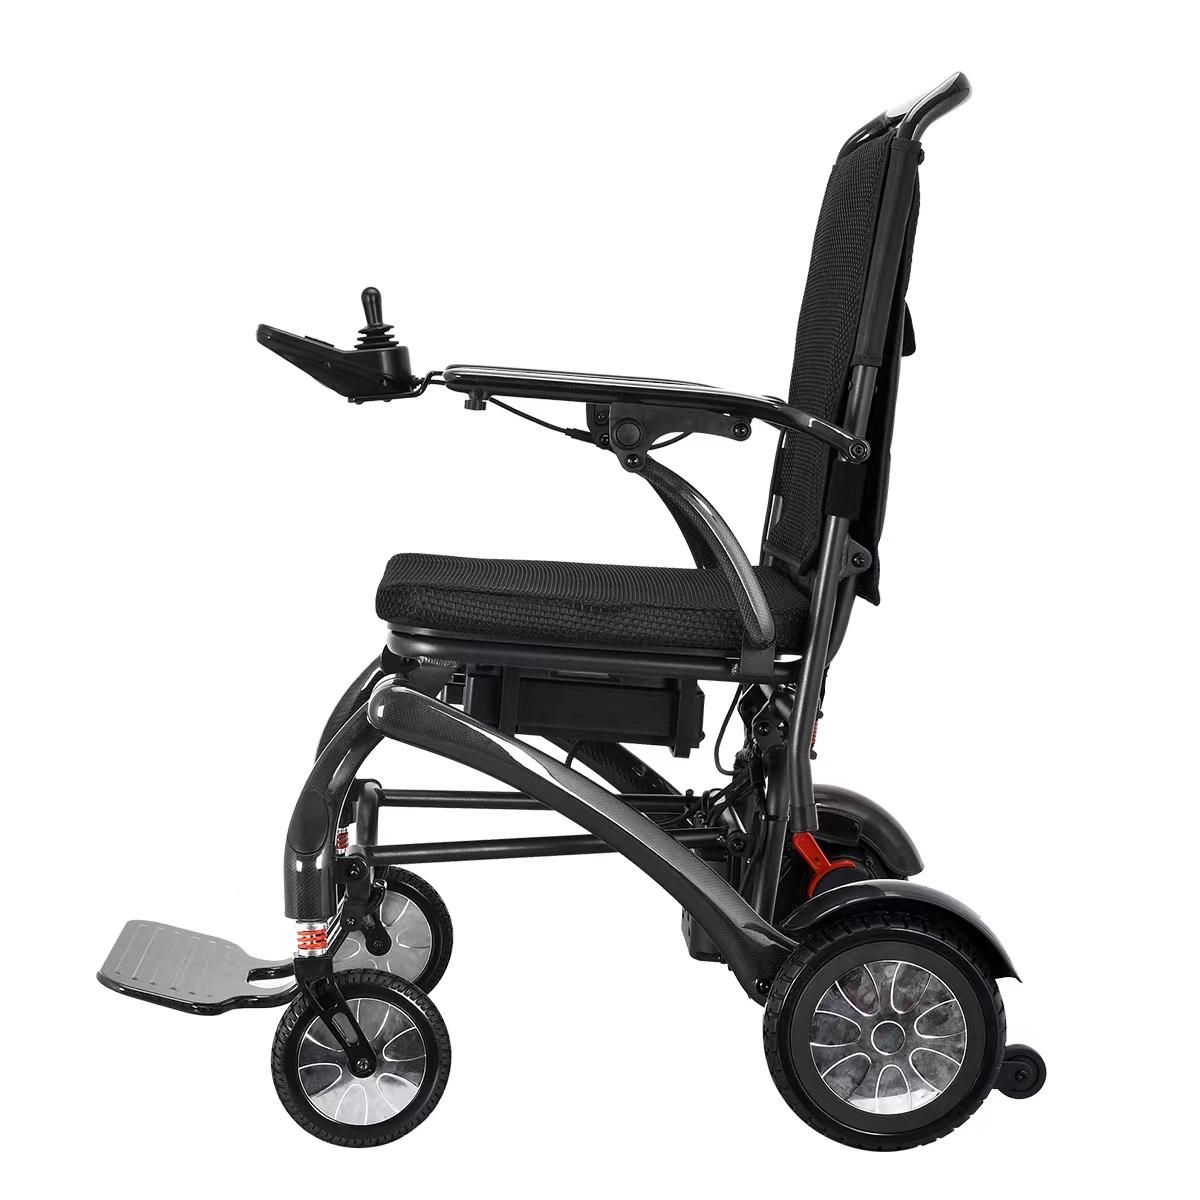 What is inconvenient for Carbon fiber electric wheelchair users in public places?